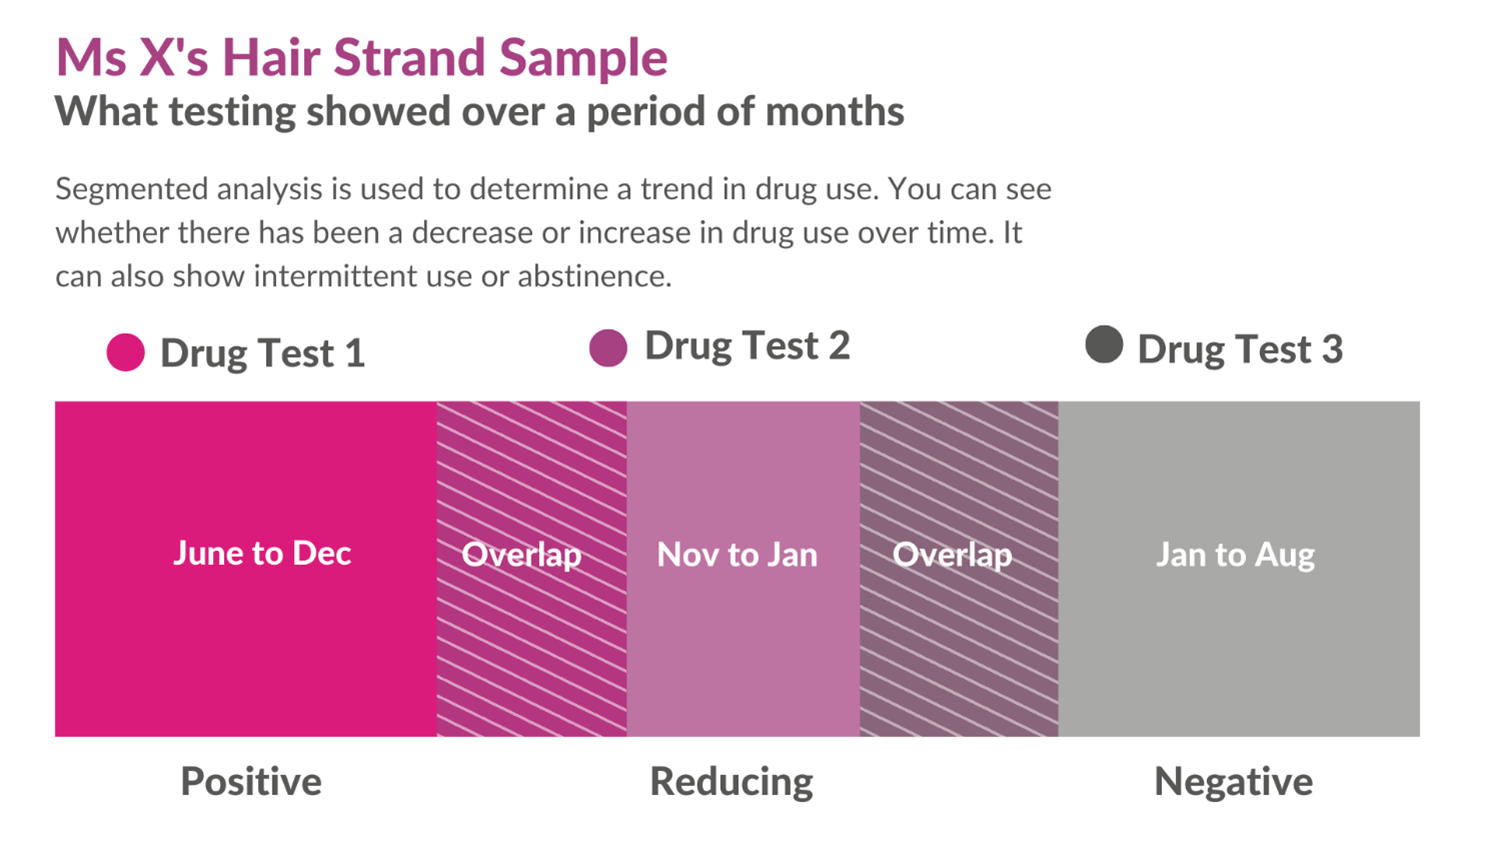 Ms X's hair strand sample and what drug testing showed over a period of months